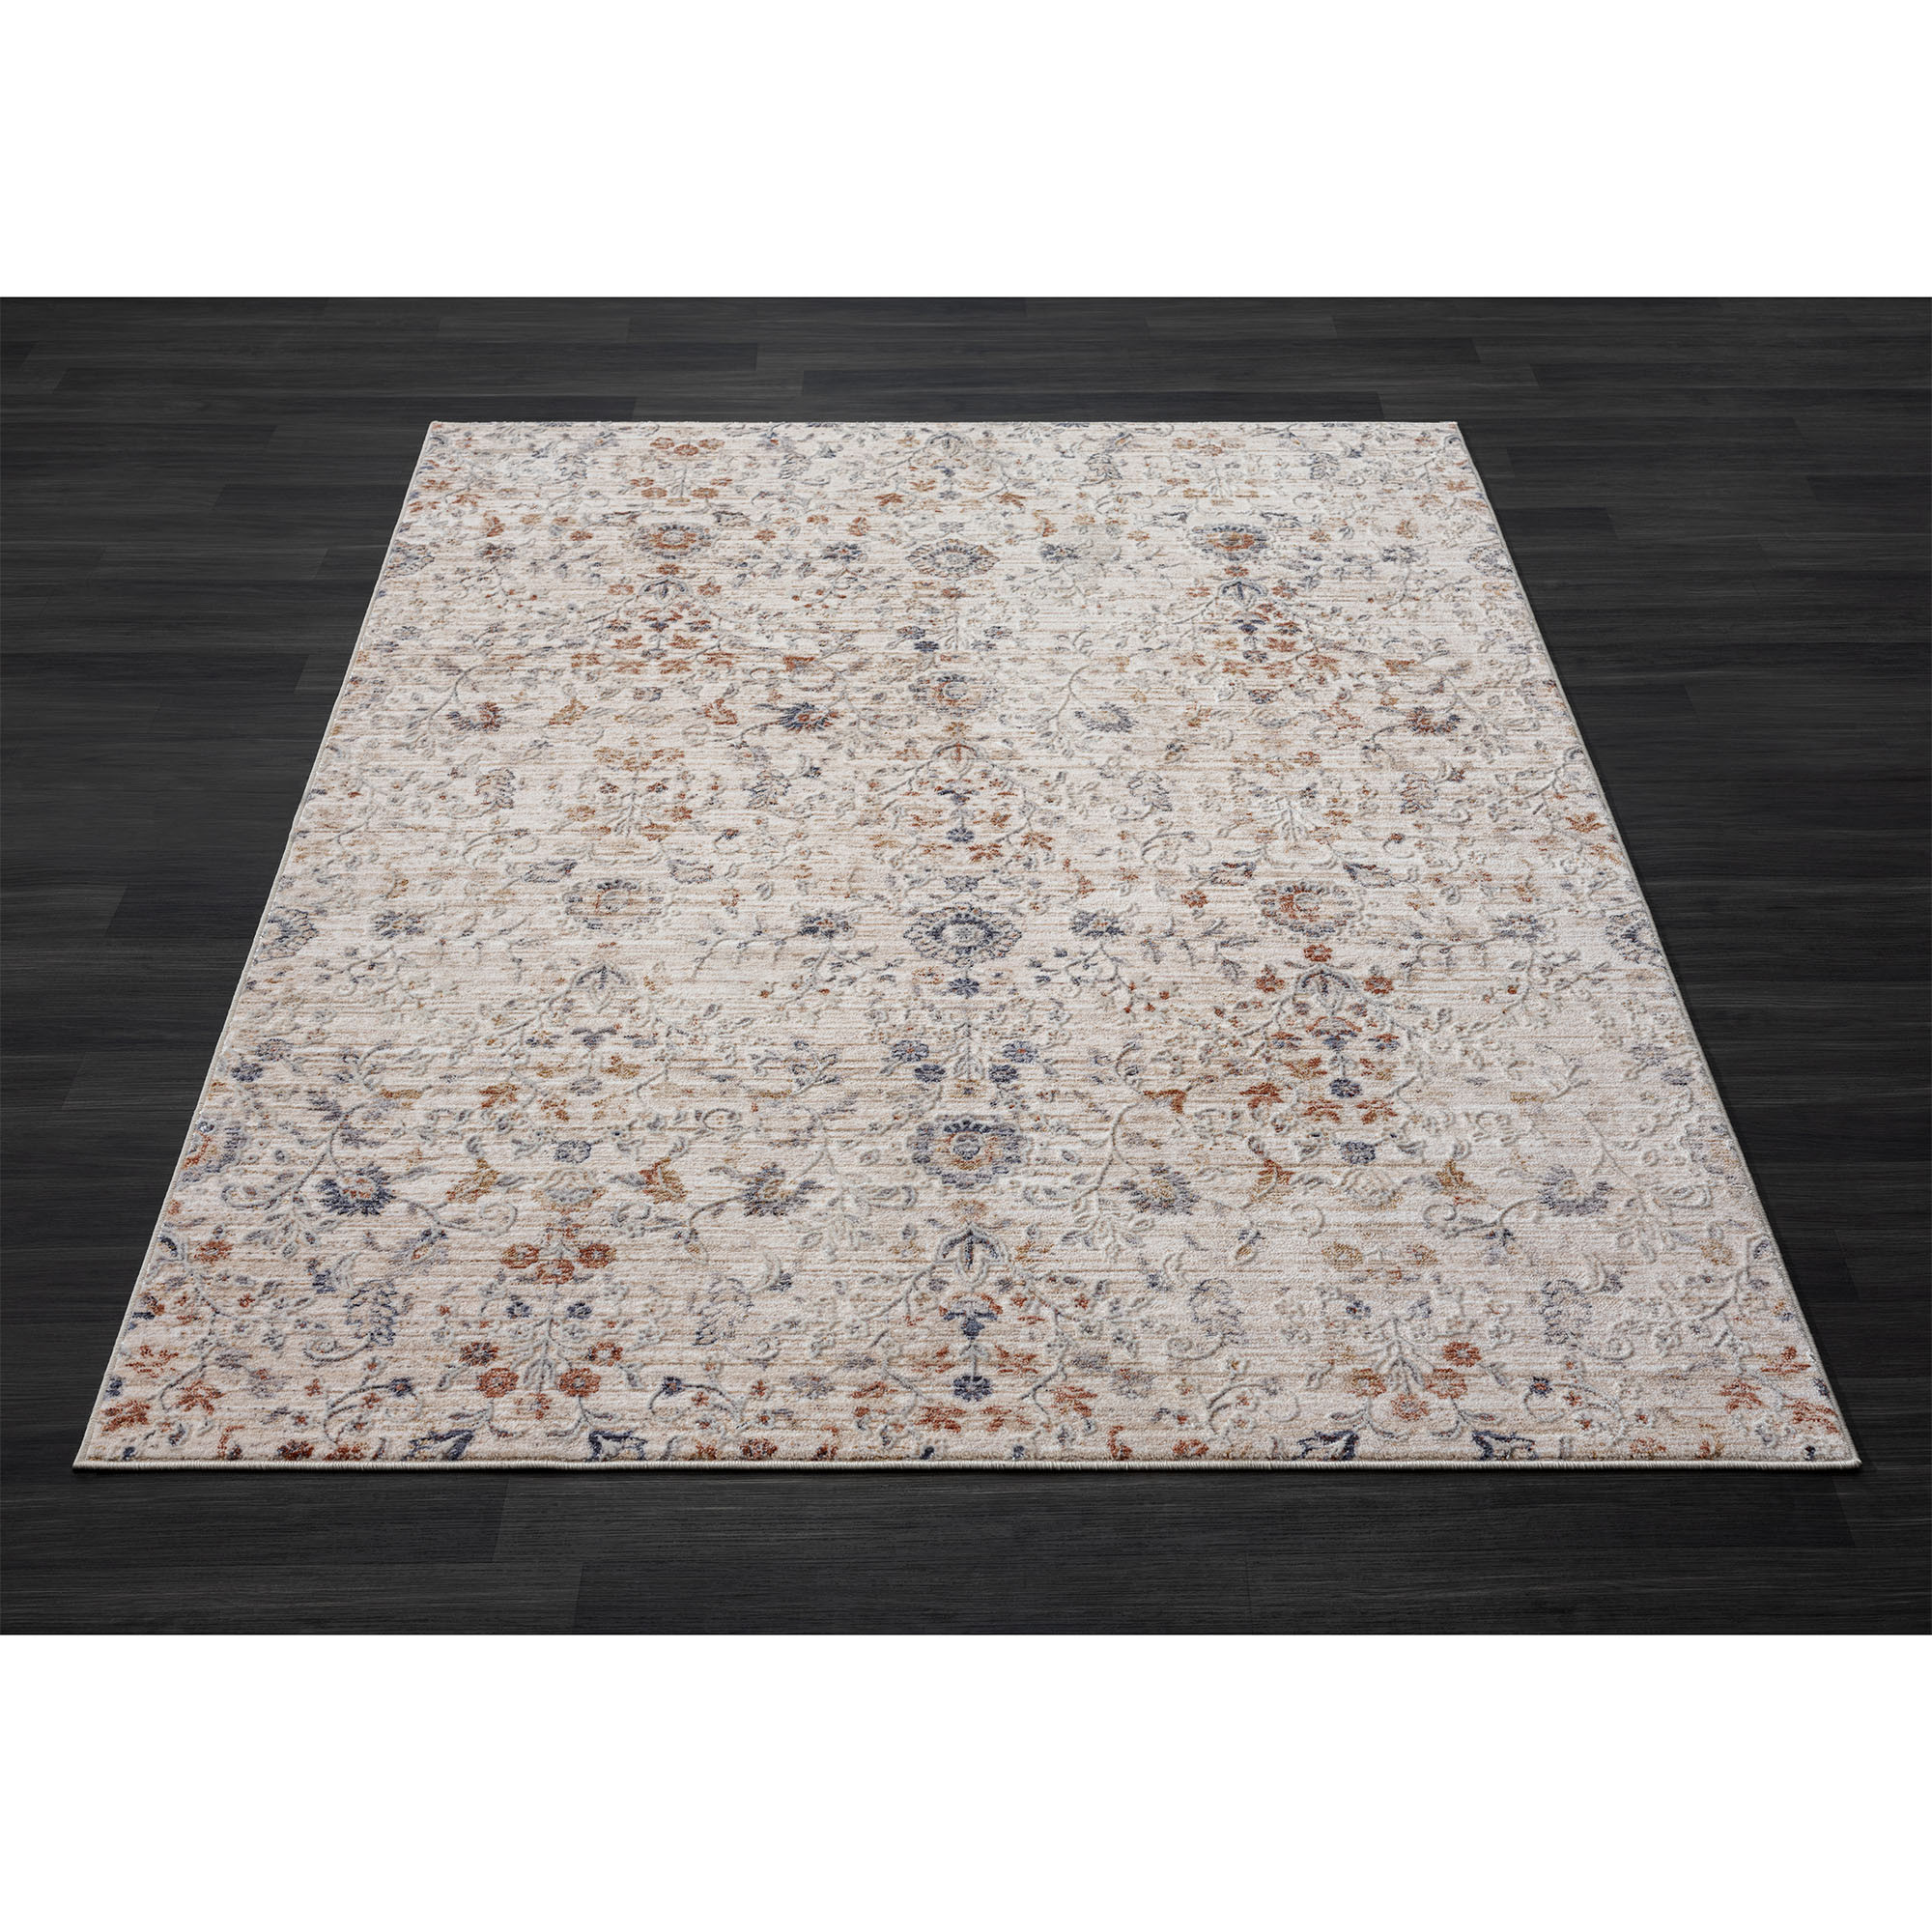 8' X 10' Ivory Floral Area Rug-516017-1